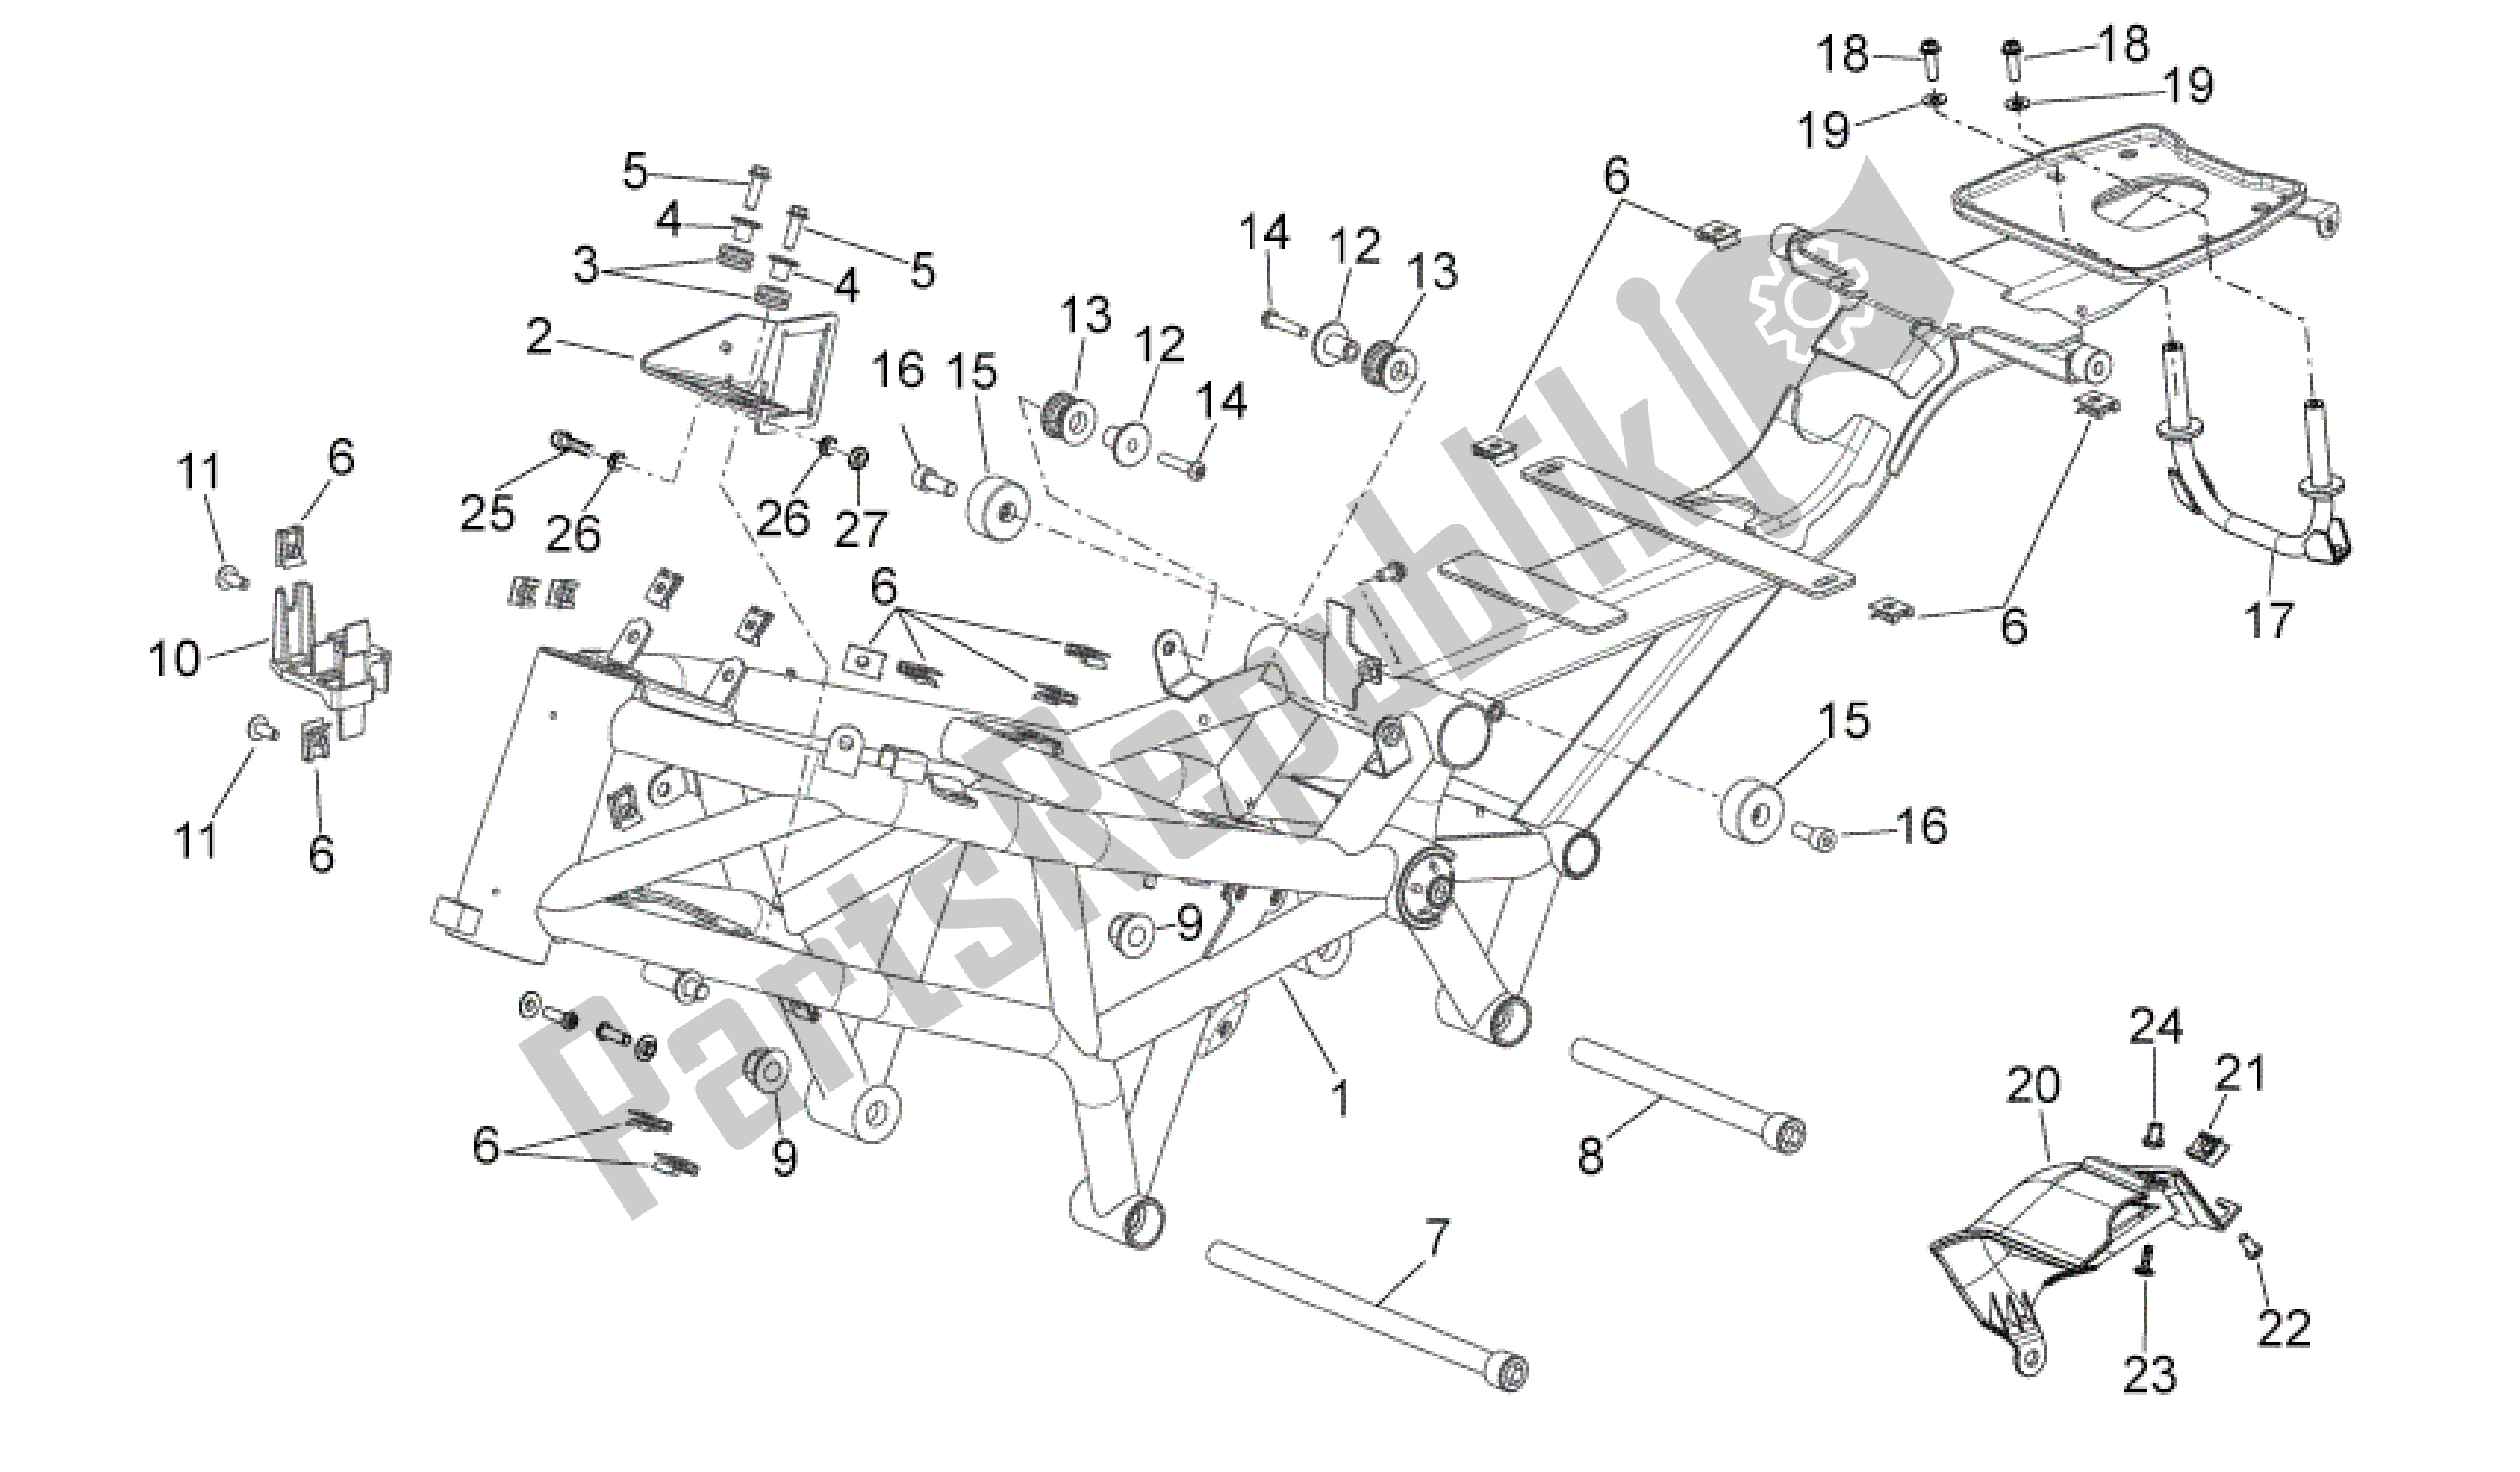 All parts for the Frame of the Aprilia Mana 850 2007 - 2011